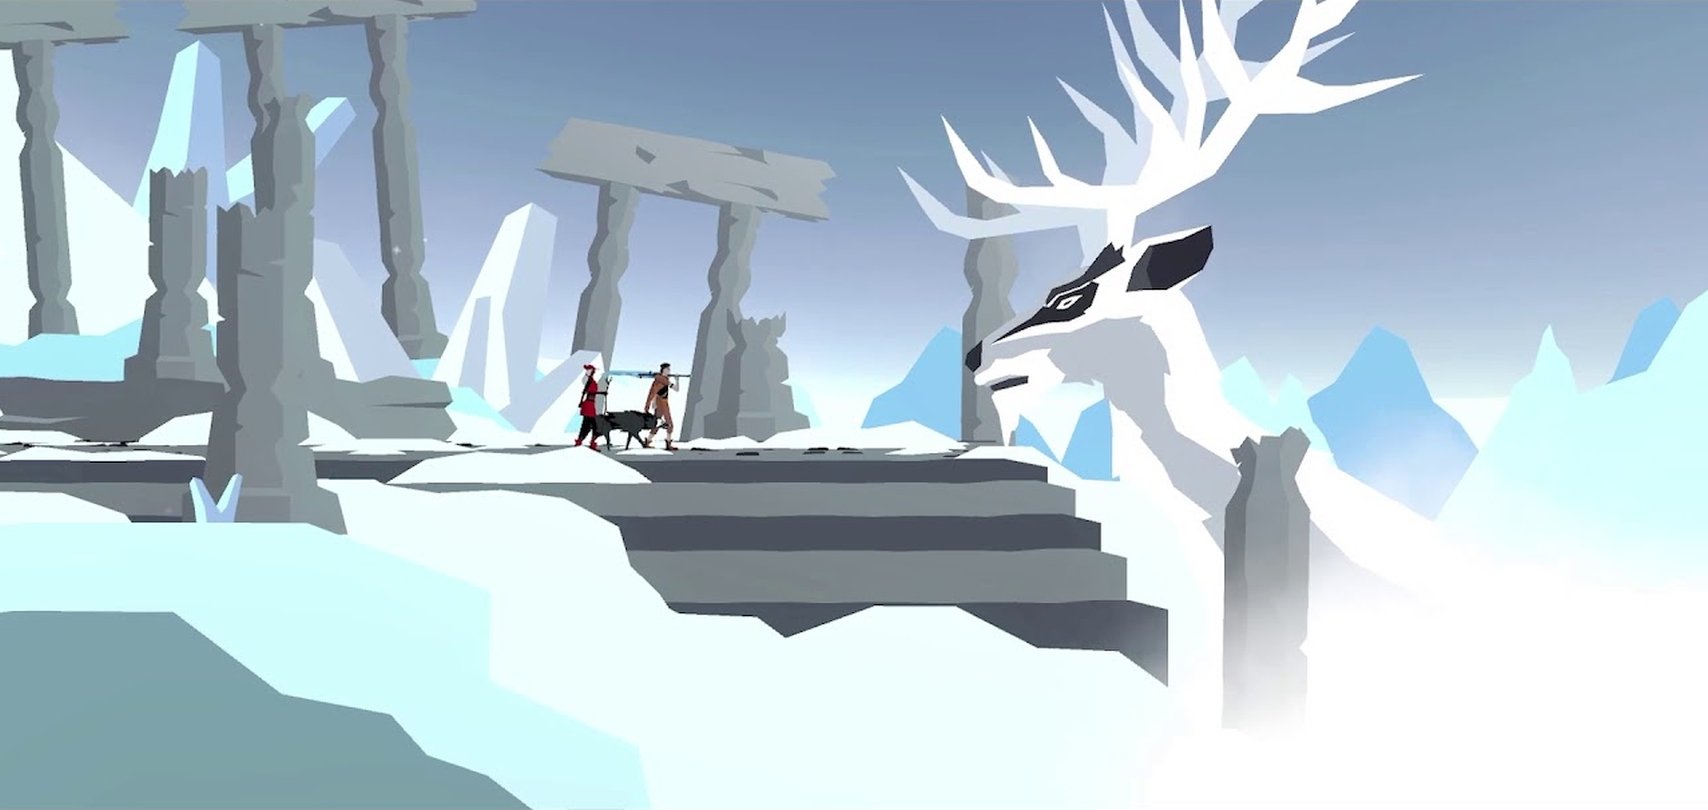 EnrightBeats’ The Greater Good Arrives On The App Store On April 22